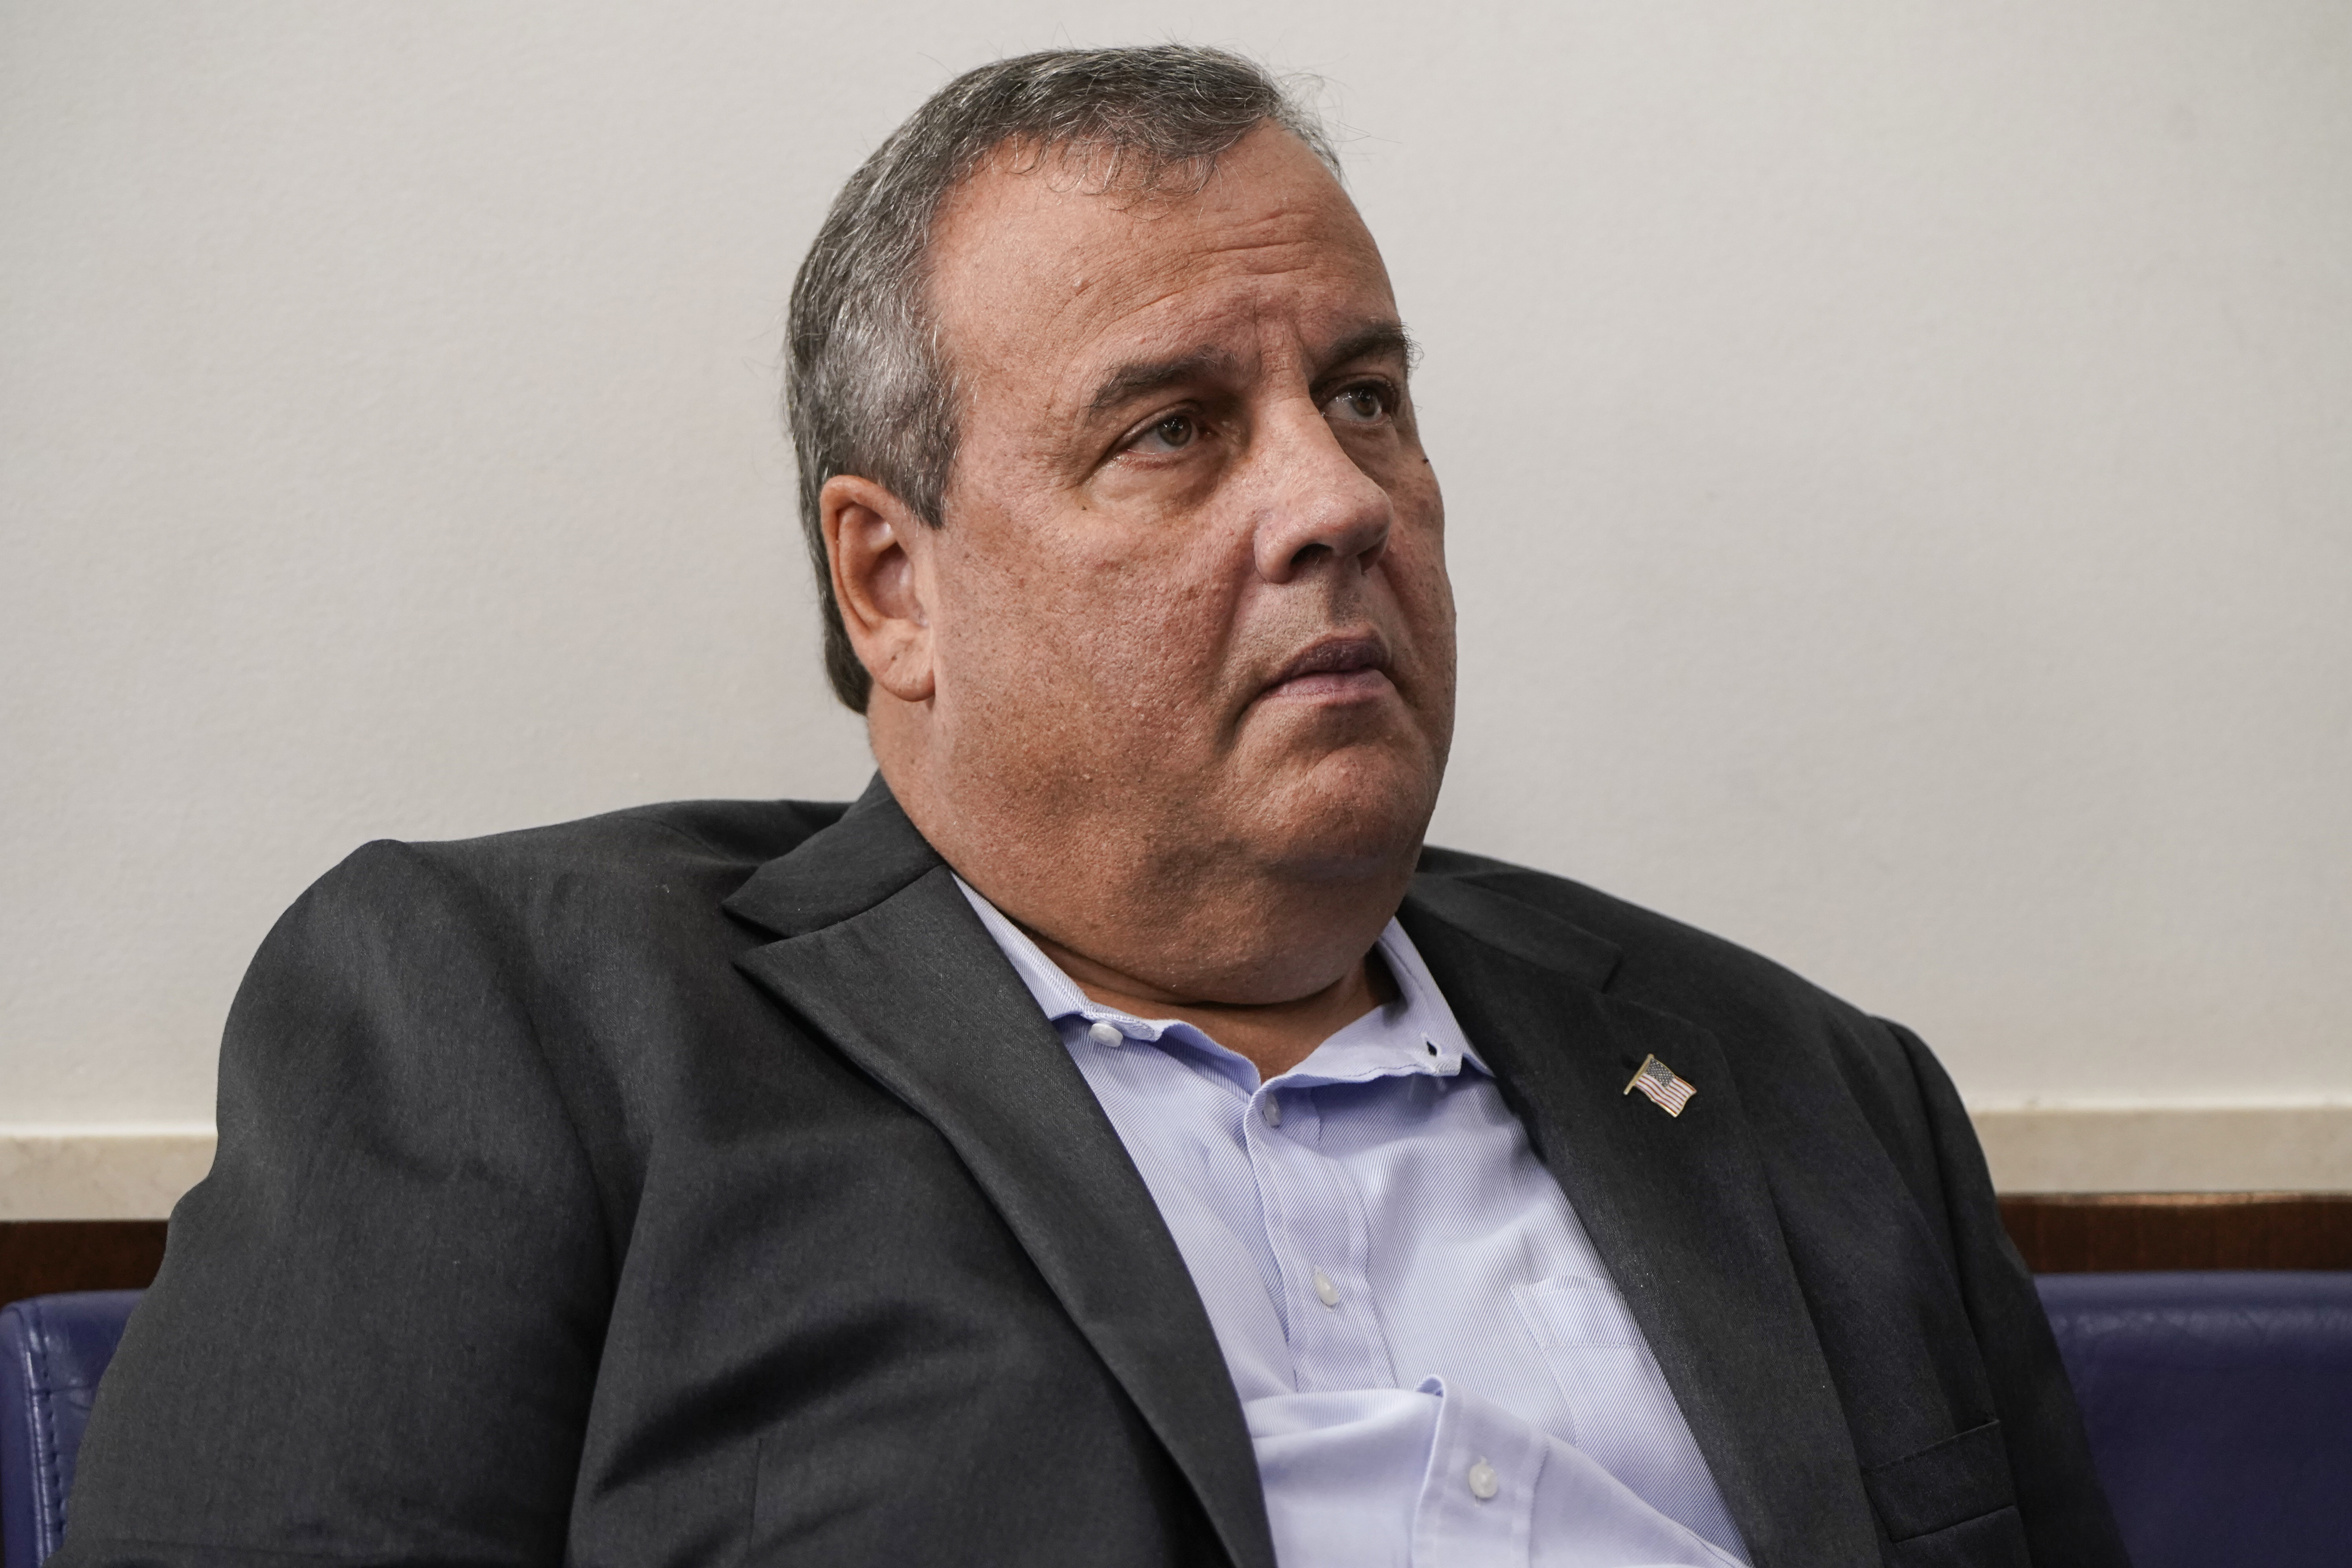 Chris Christie Tricked Into Trolling Montana Republican Gubernatorial Candidate On Cameo